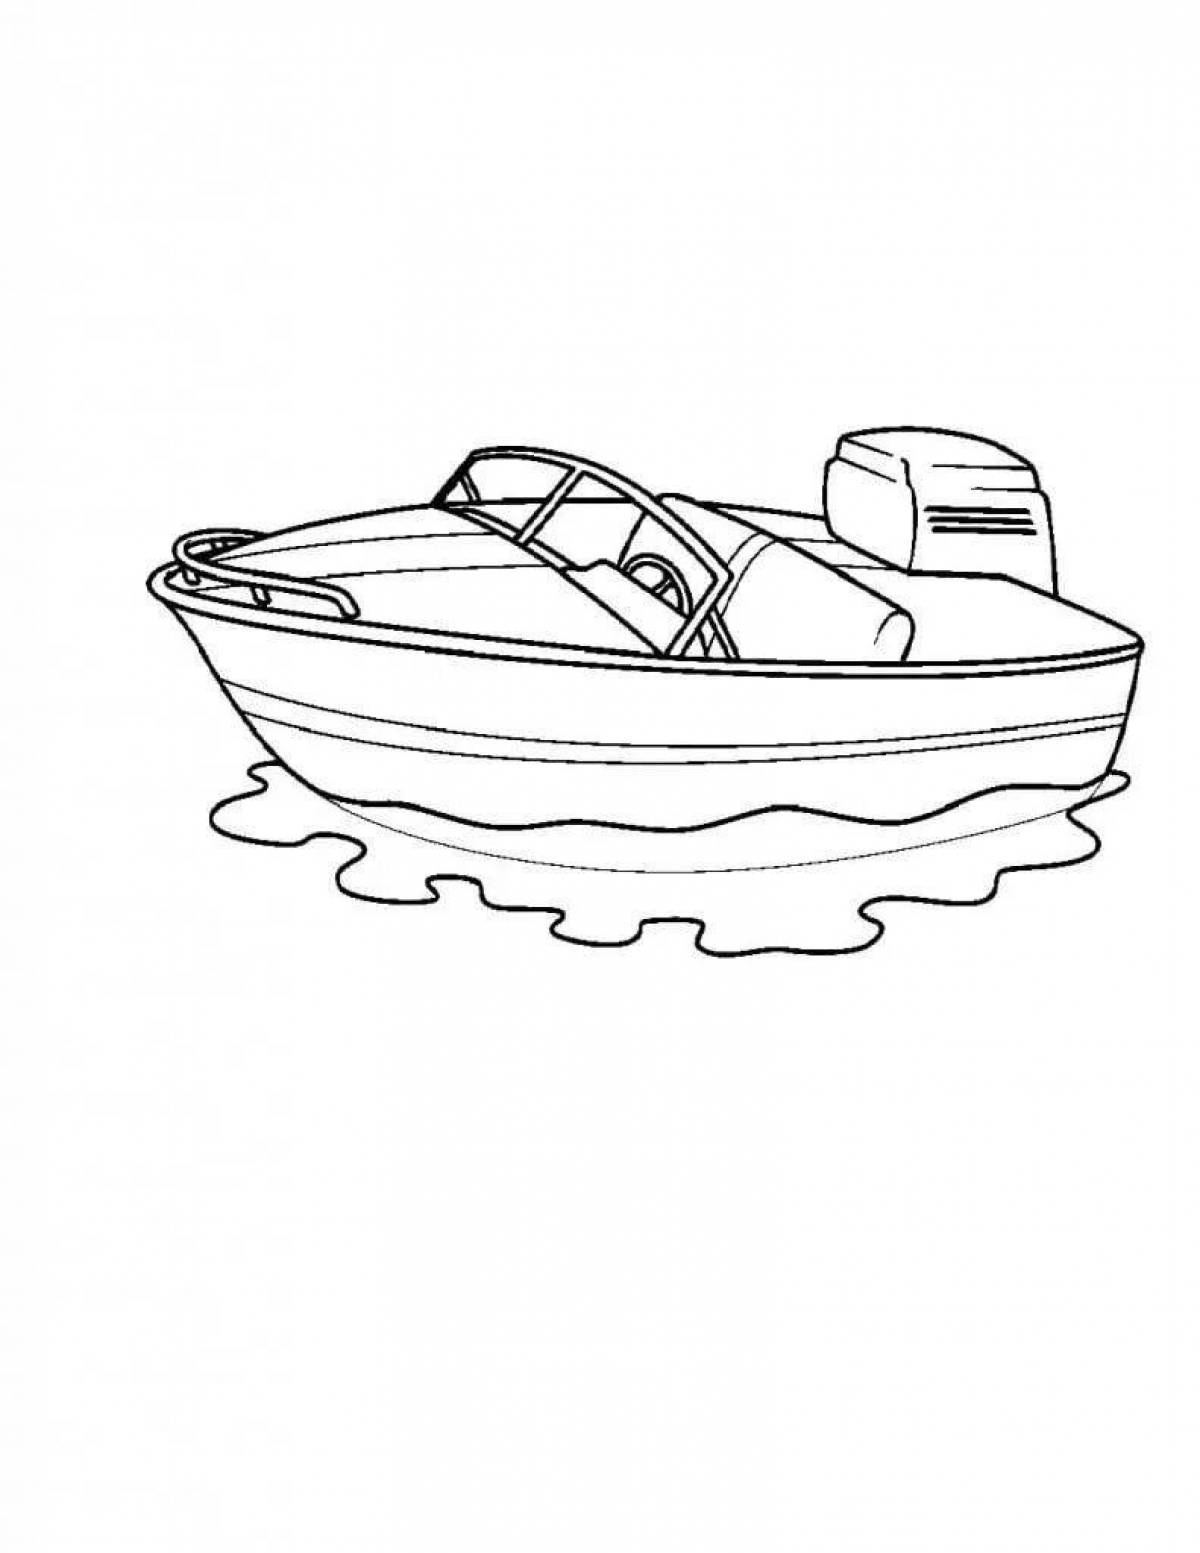 Coloring page gorgeous motorboat